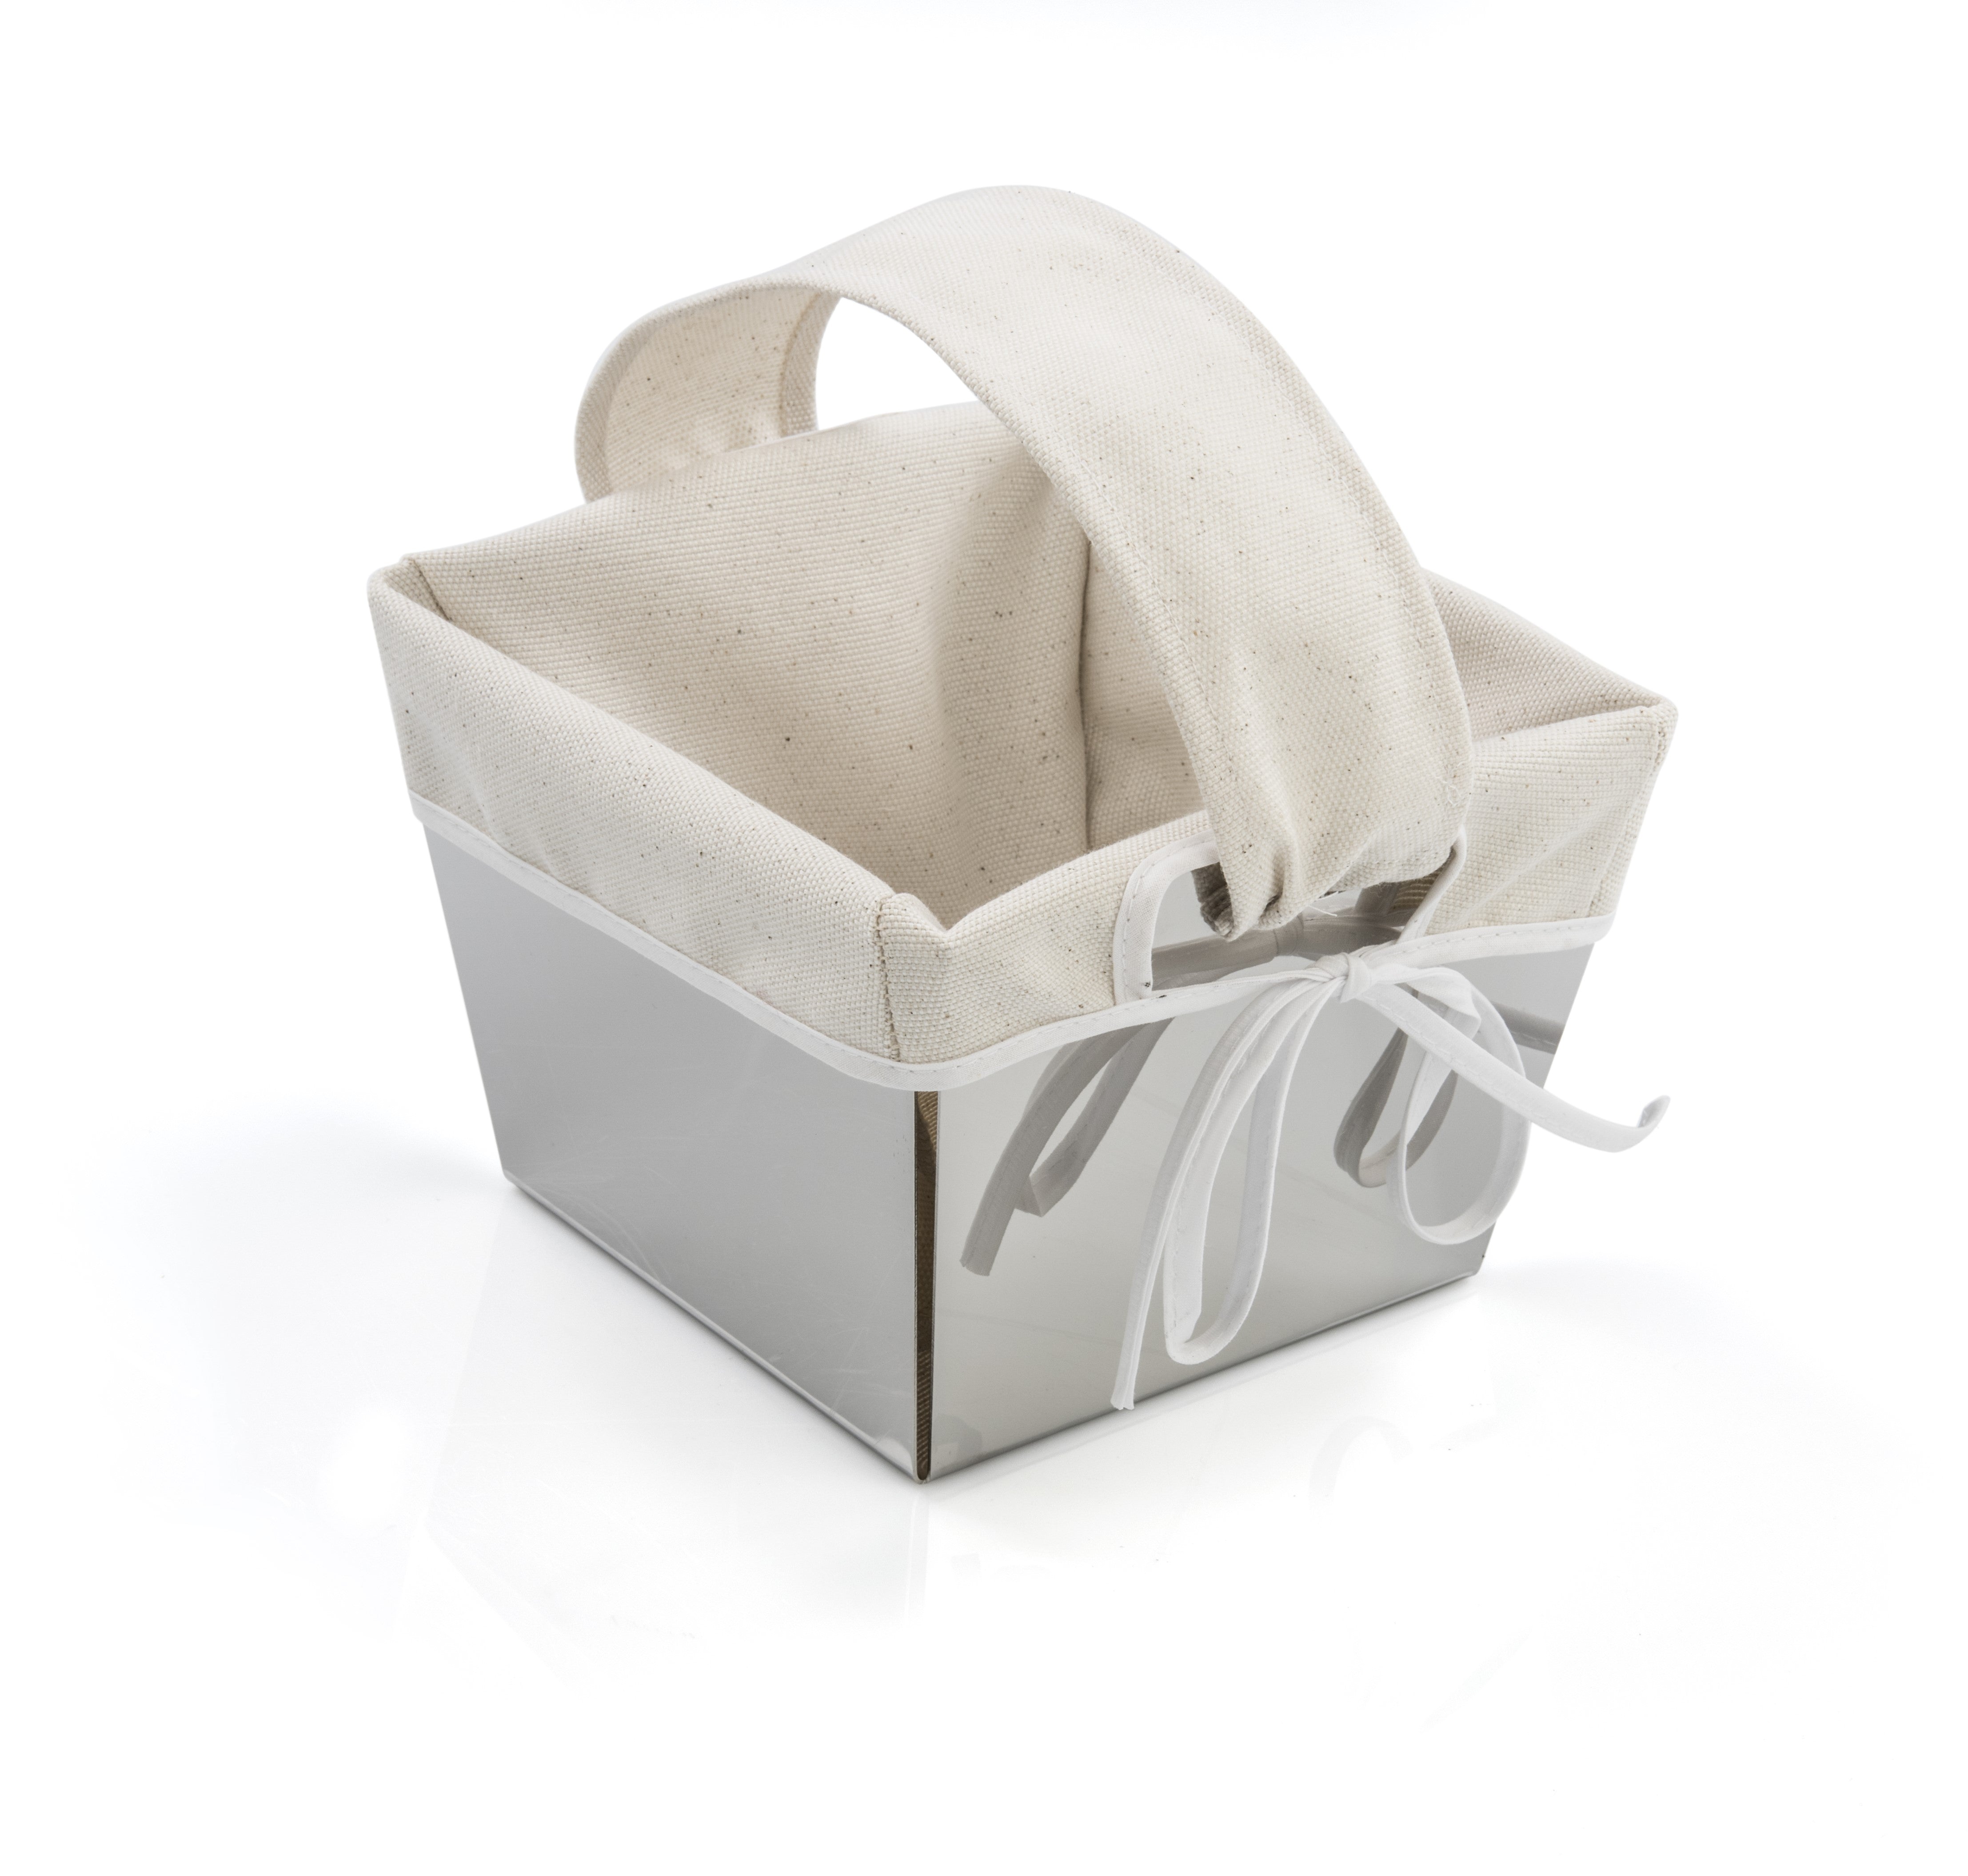 Elleffe Design Small bread basket in stainless steel and fabric, 18 x 18 cm